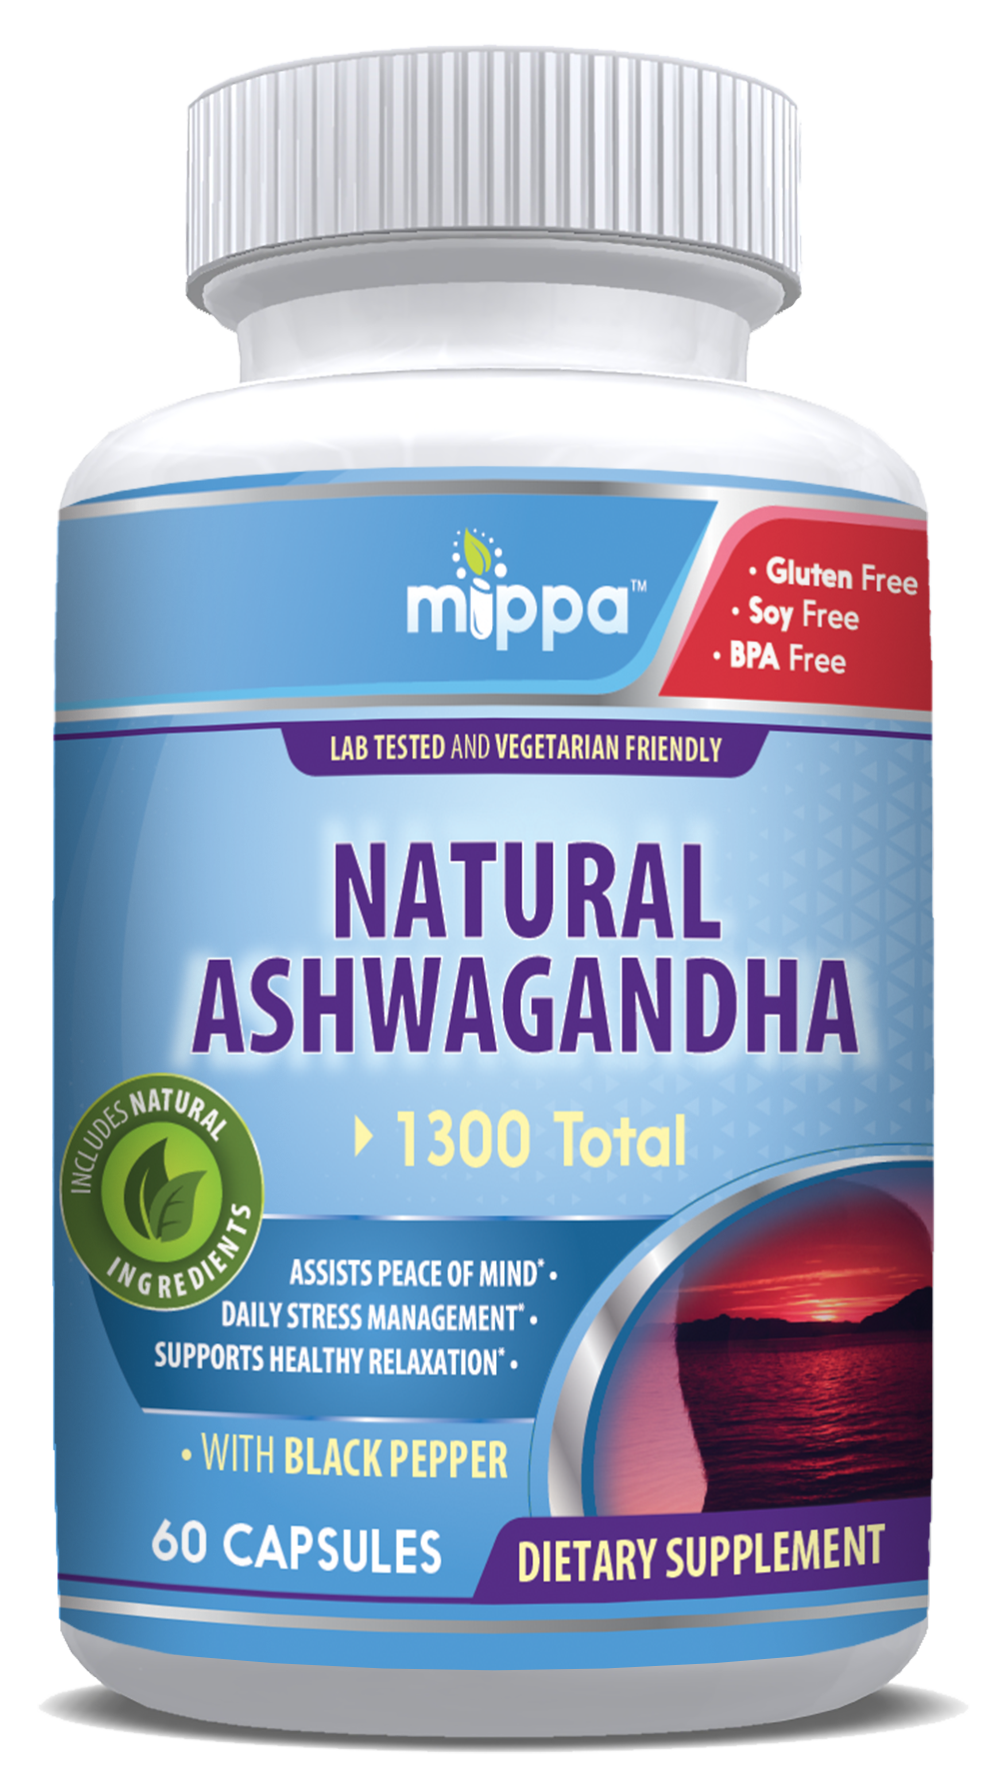 Ashwagandha with black pepper extract